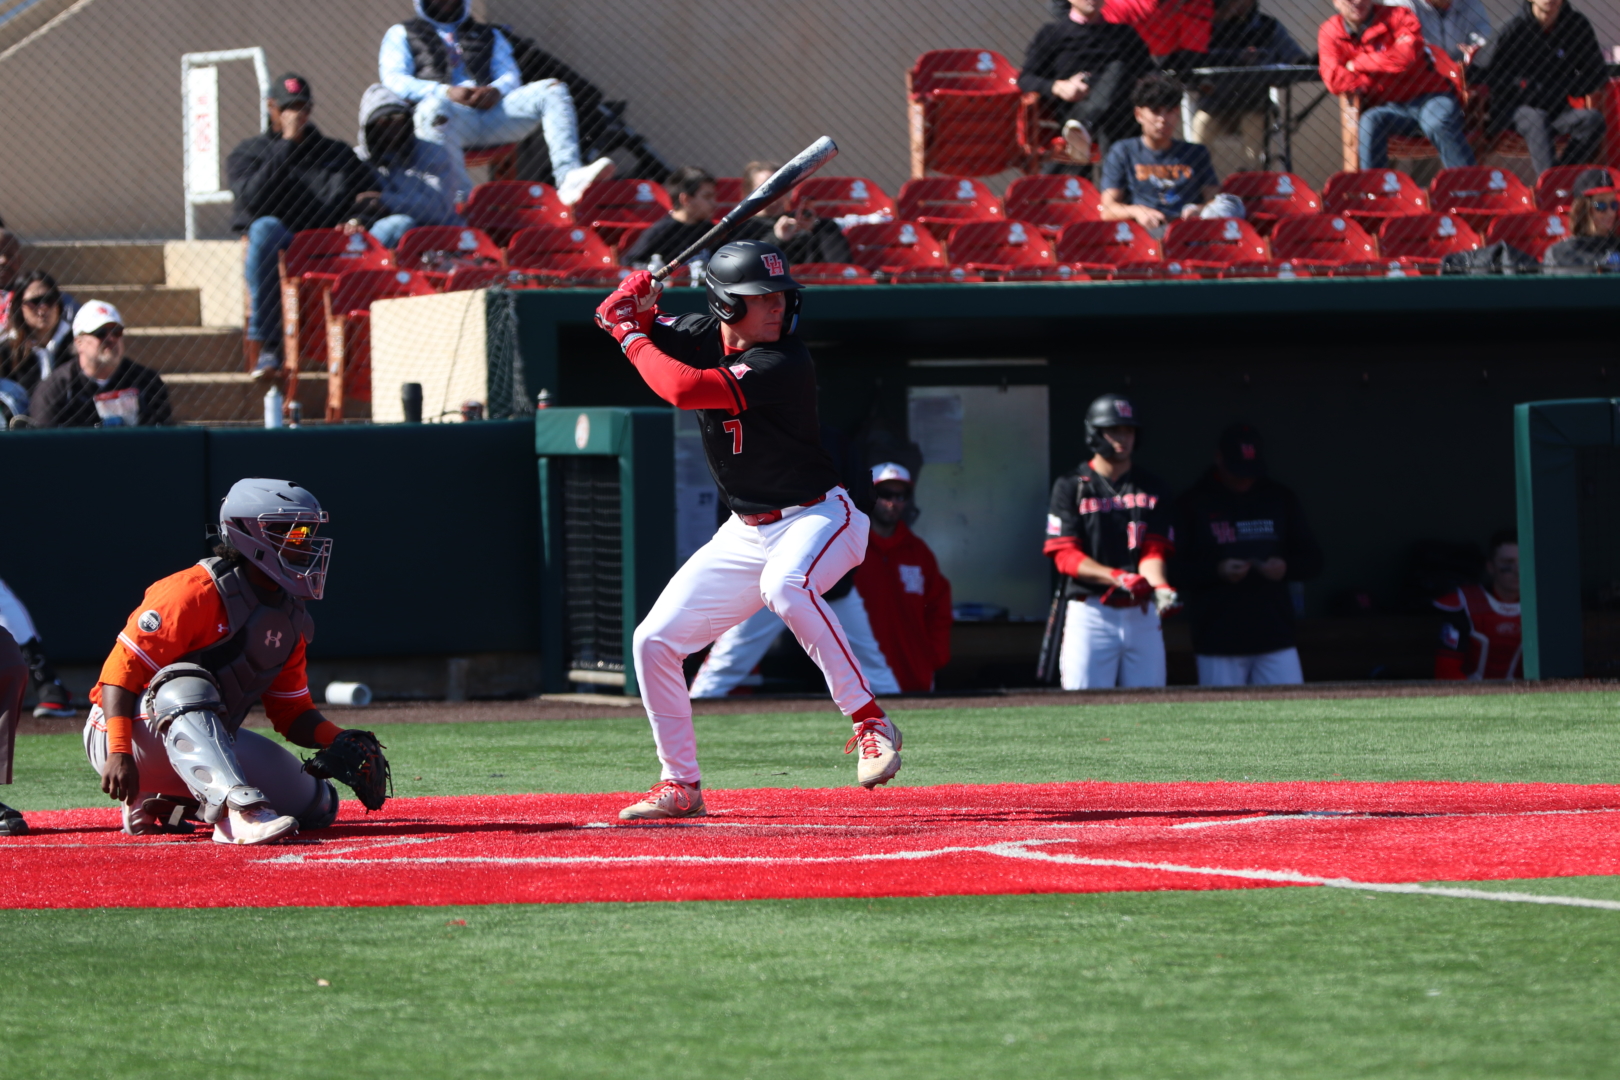 UH baseball third baseman Zach Arnold drove in four runs, including hitting his first home run of the season, in game one of Sunday's doubleheader against UTRGV. | James Mueller/The Cougar